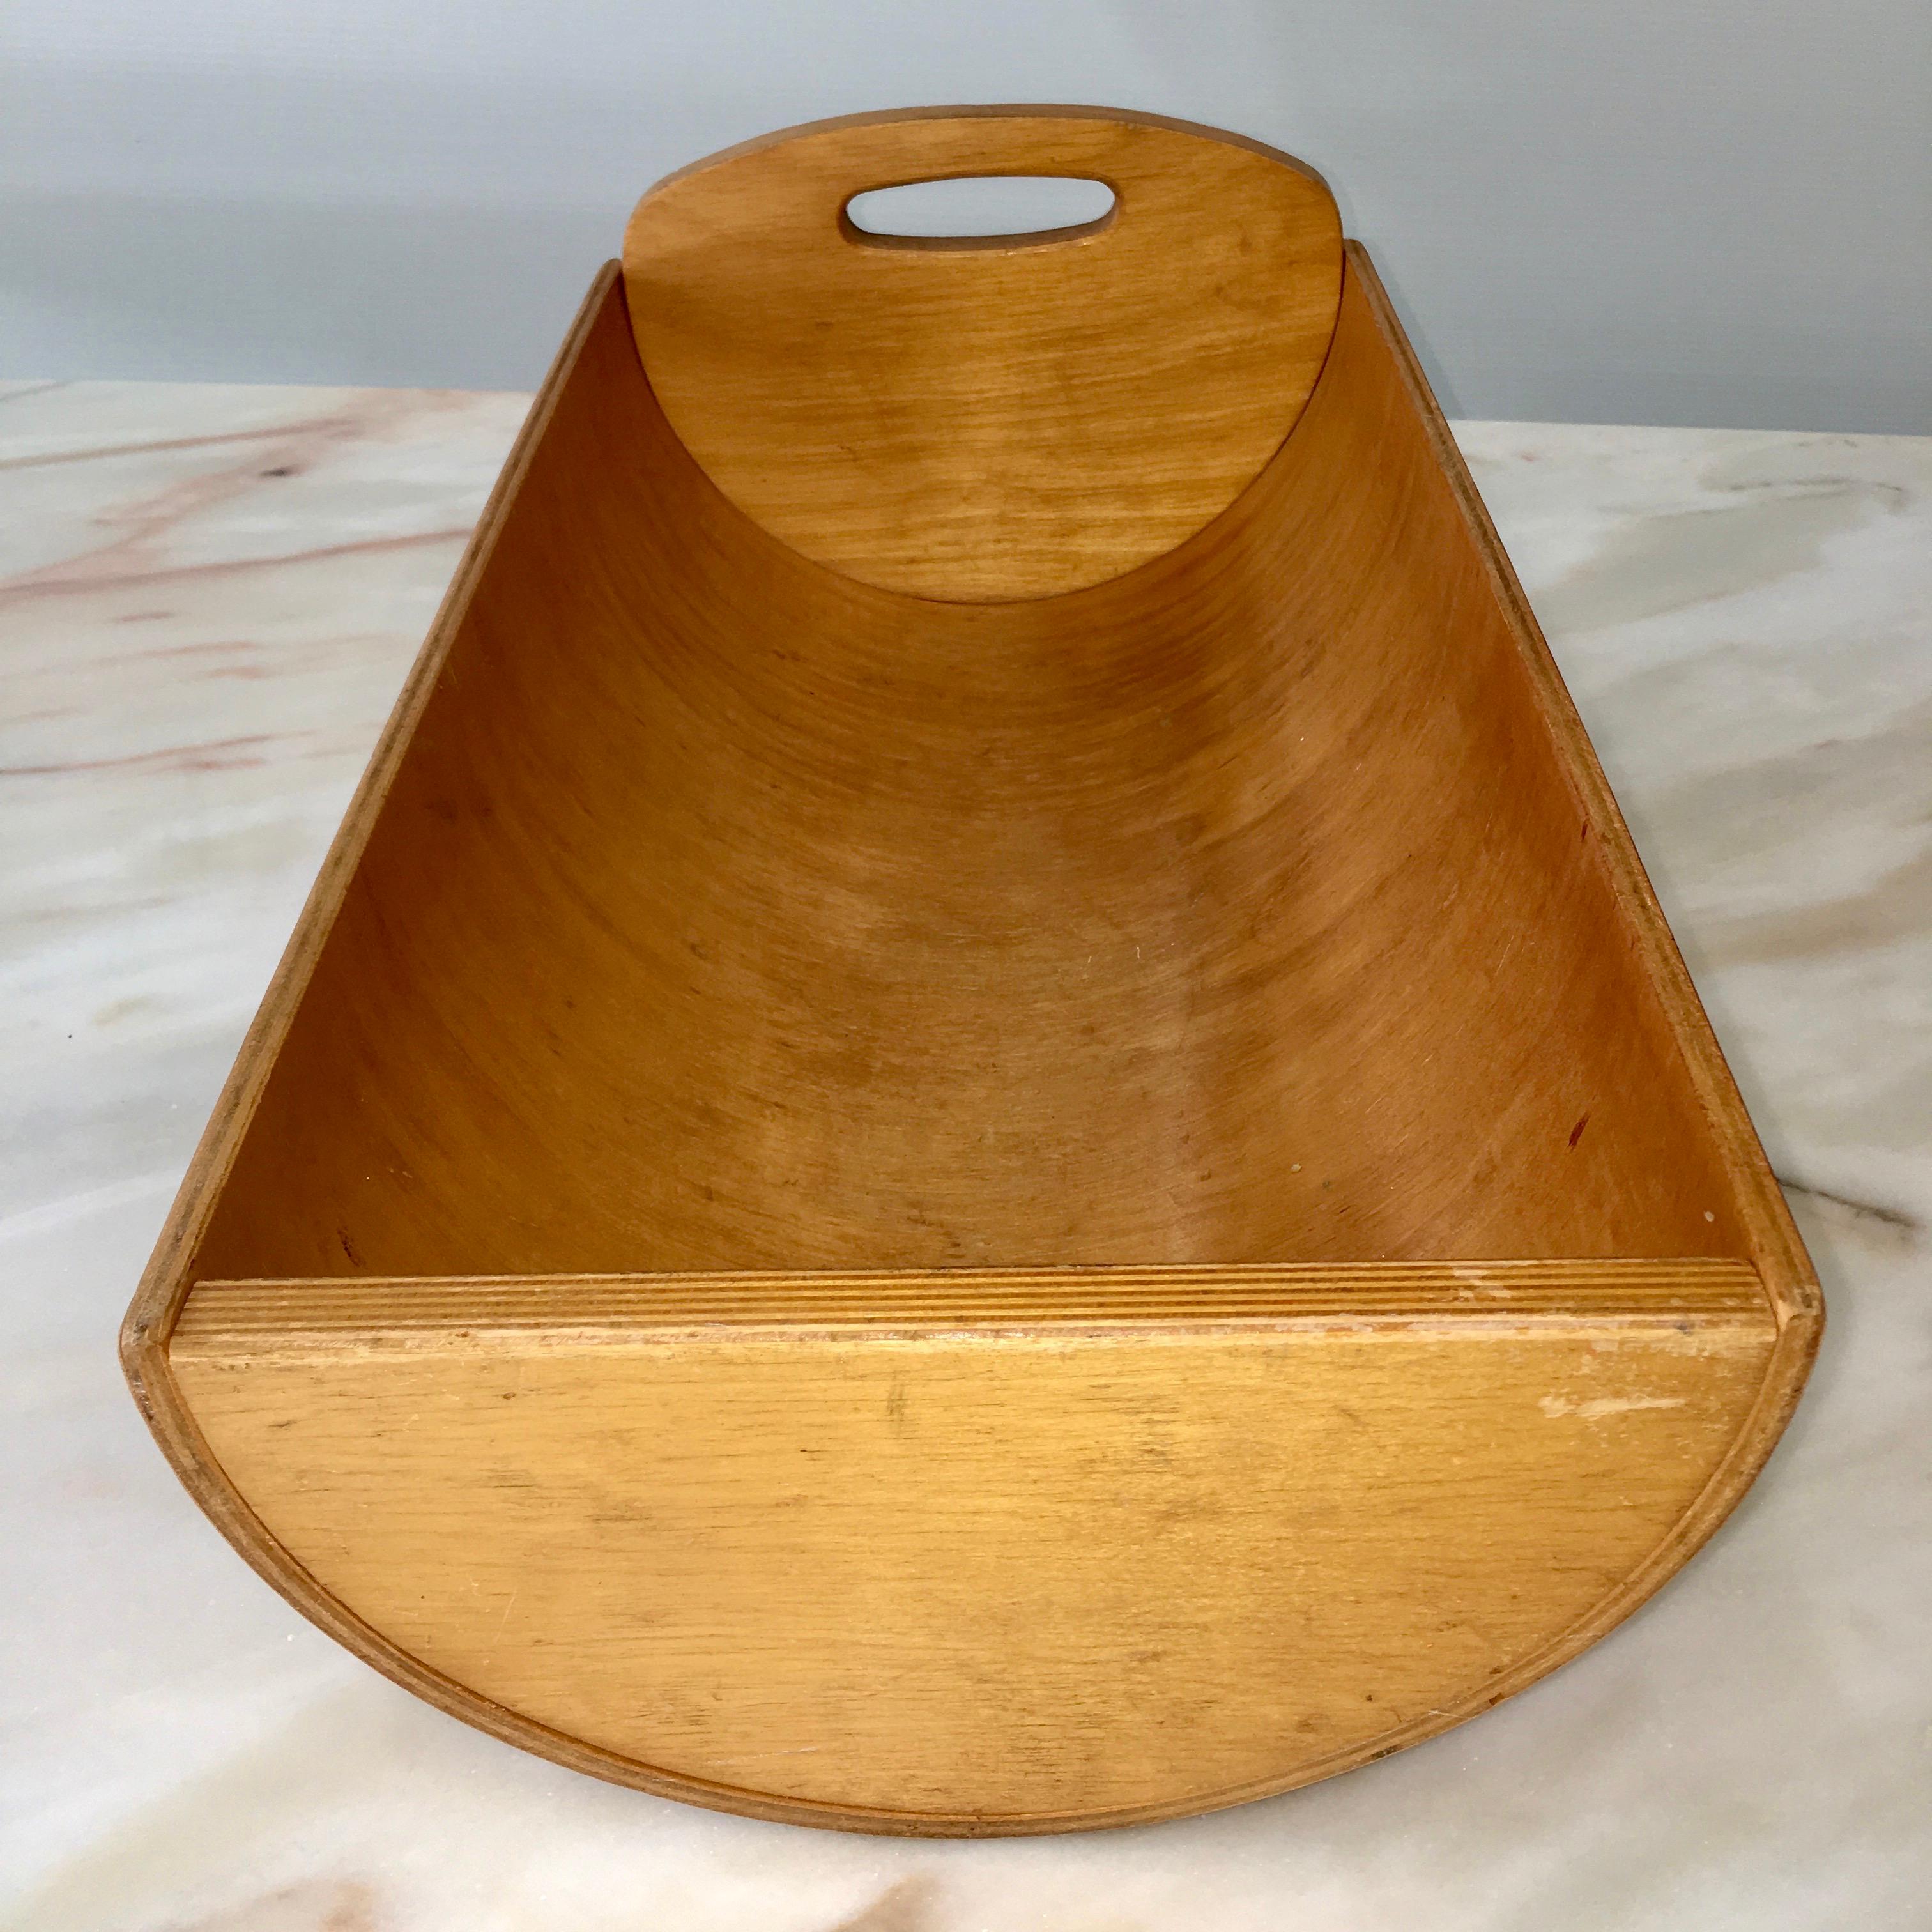 Molded plywood doll cradle by Gloria Caranica for Creative Playthings, circa 1956.
Creative playthings of Princeton, NJ was founded in 1949 by Frank & Theresa Kaplan and Bernard & Edith Barenholtz, educators and pioneers in the design and